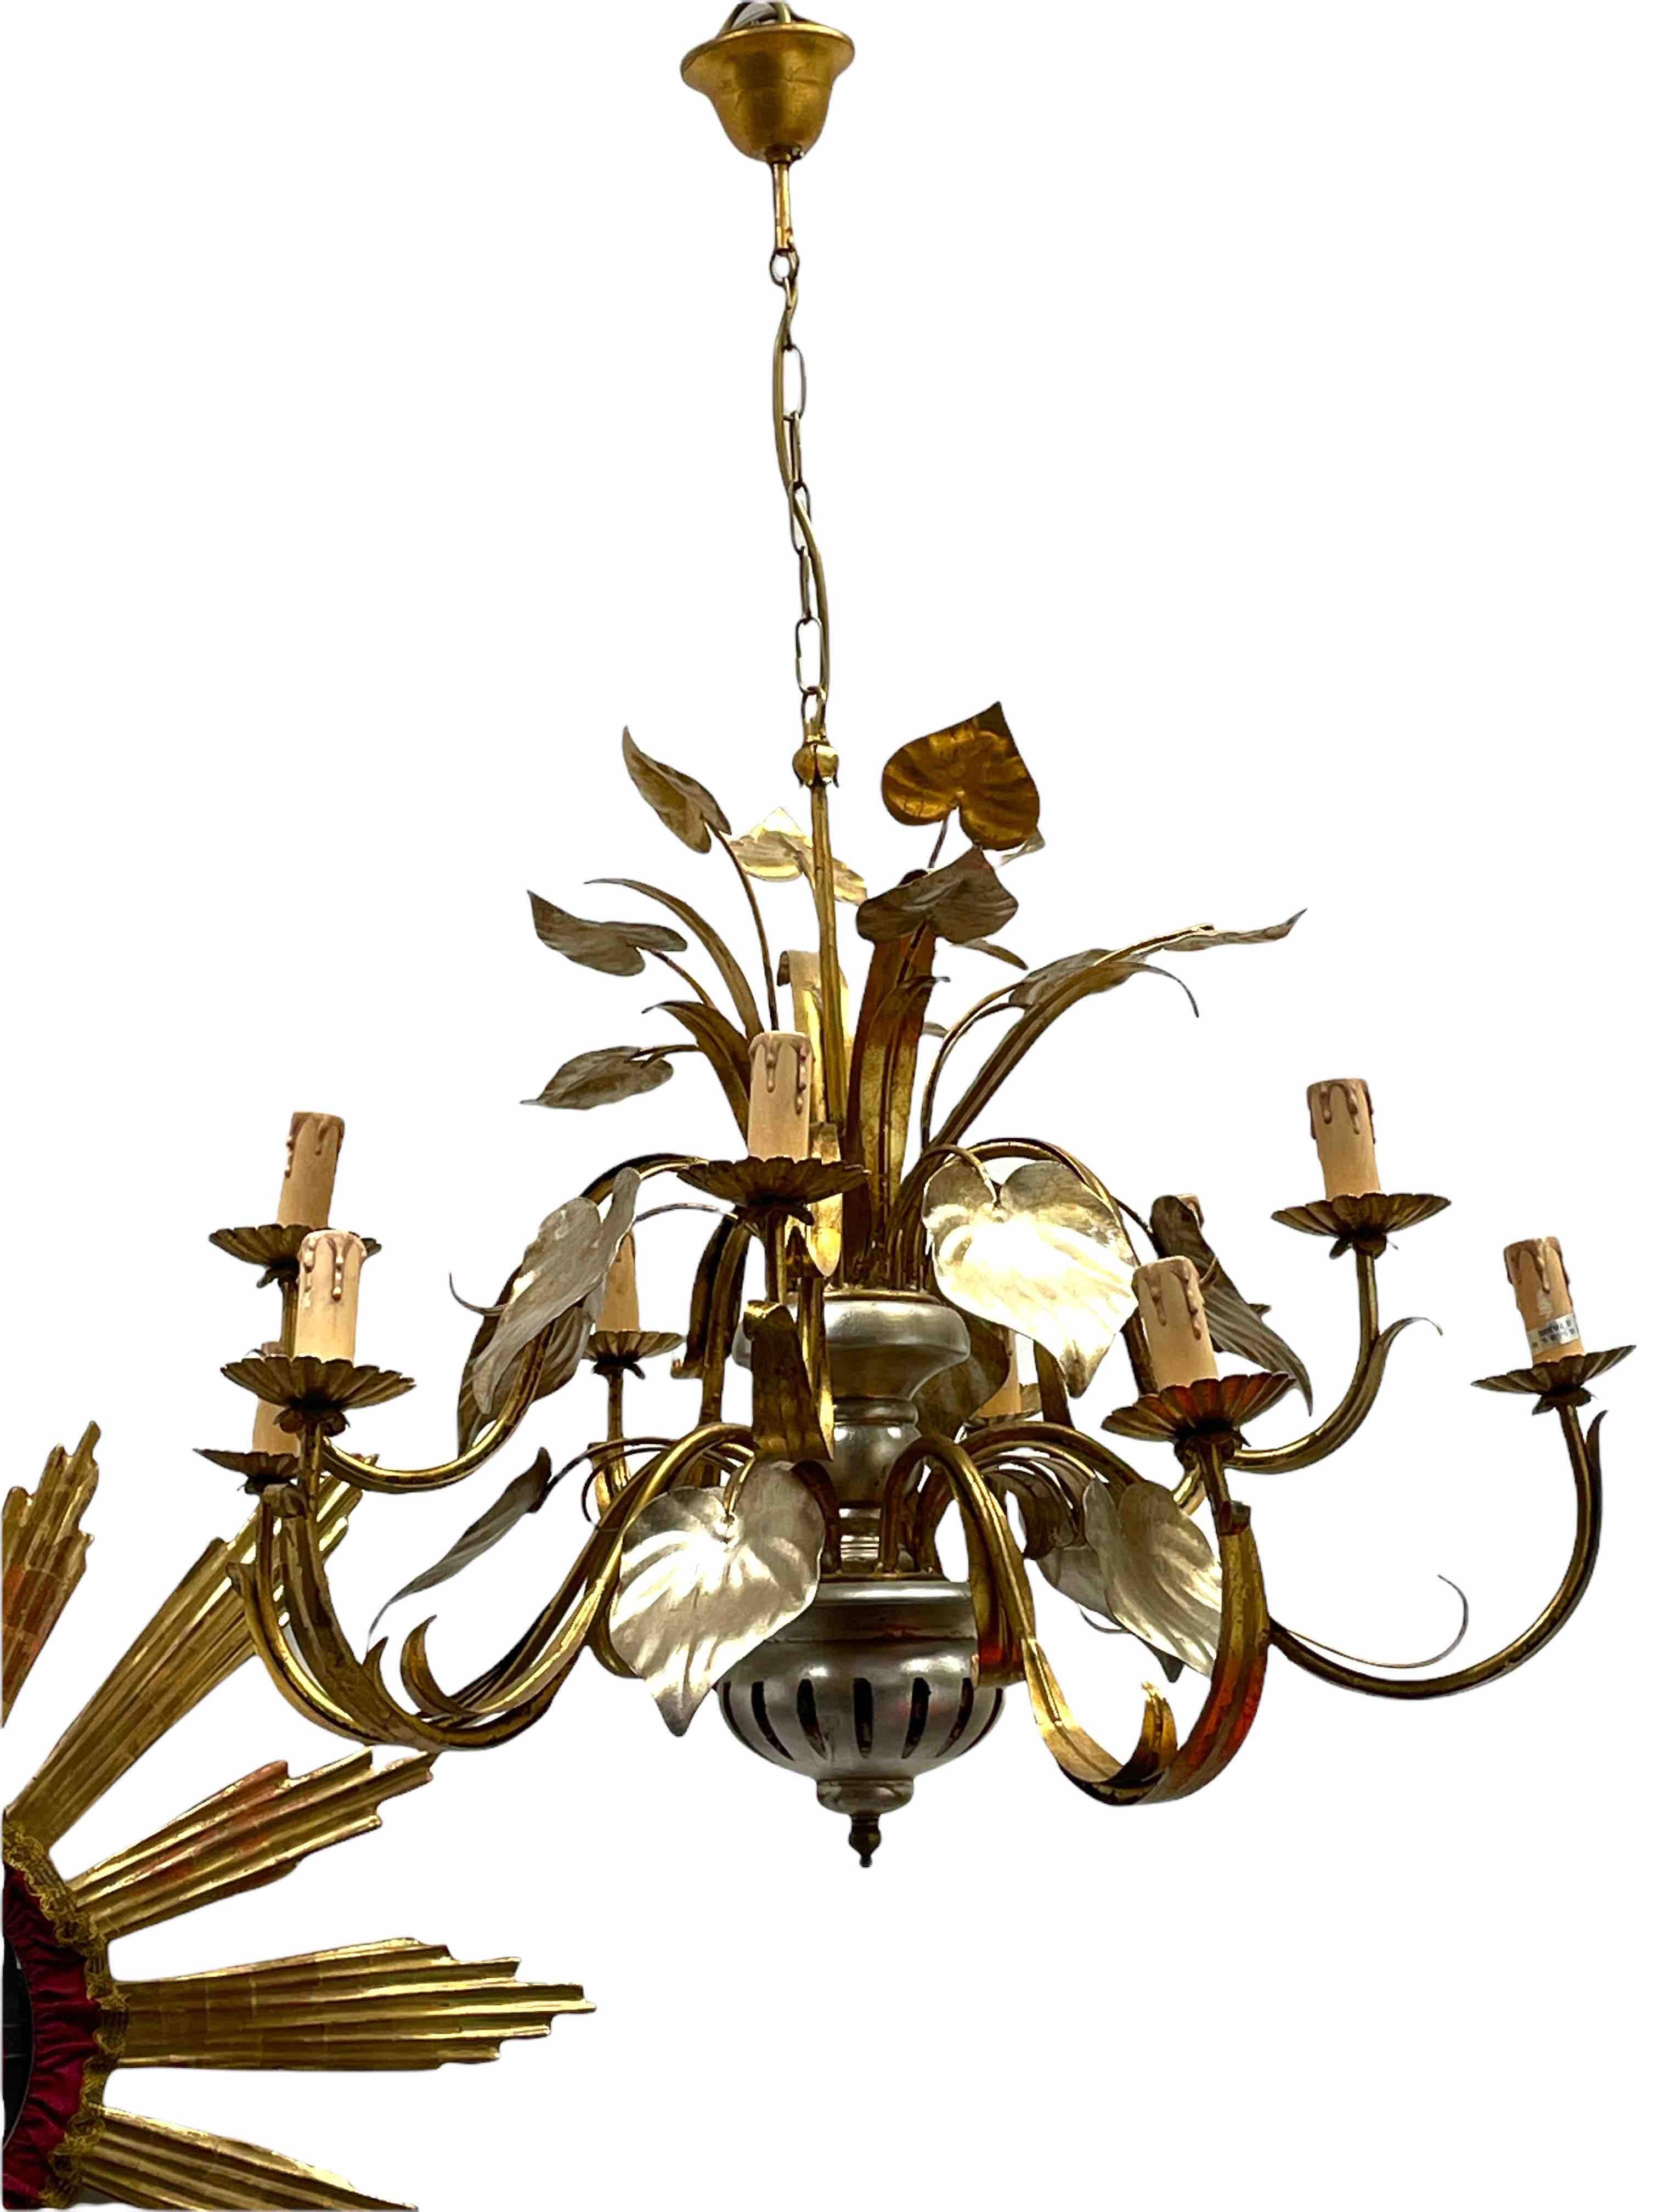 Add a touch of opulence to your home with this charming chandelier! Perfect gilt and silvered Metal and wood to enhance any chic or eclectic home. We'd love to see it hanging in an entry hall or in a Living / Dinning room area. Built in the 1960s,